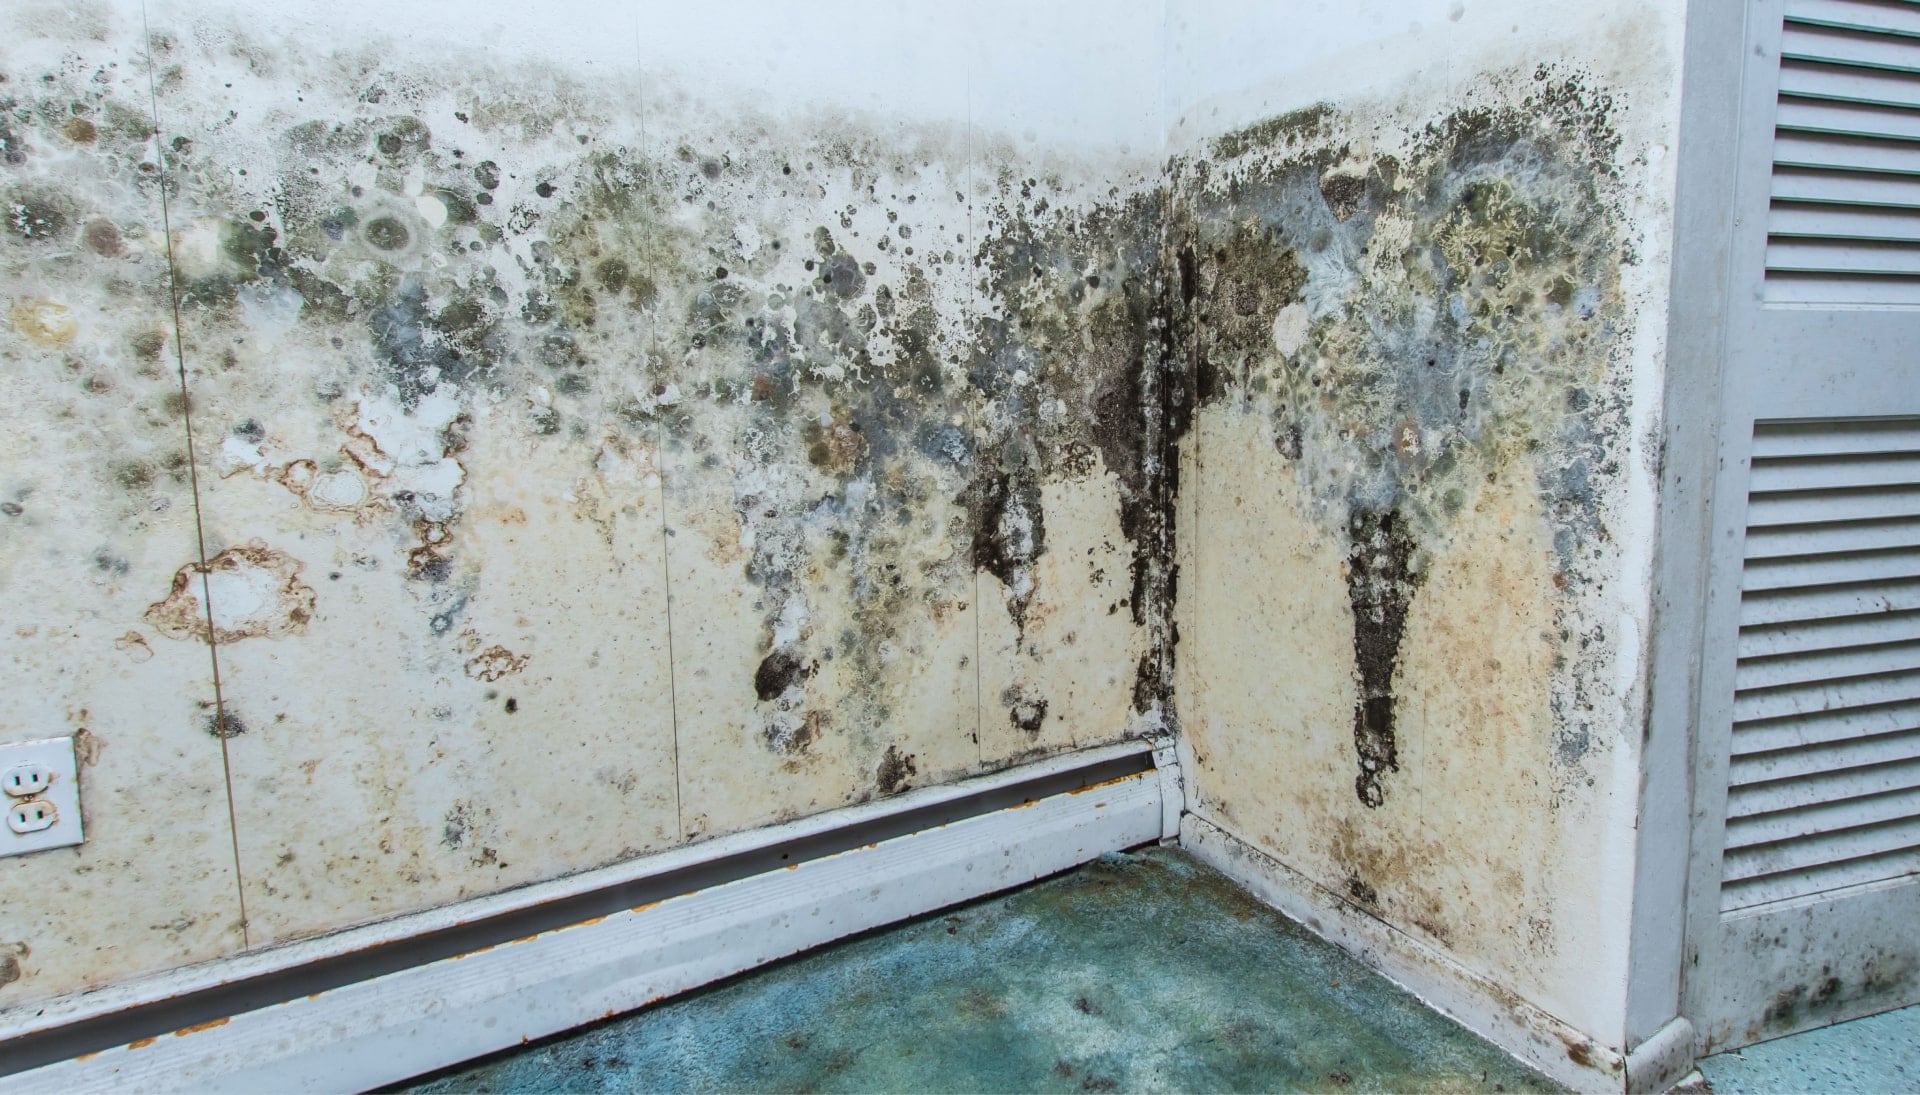 Professional mold removal, odor control, and water damage restoration service in Maryville, Tennessee.